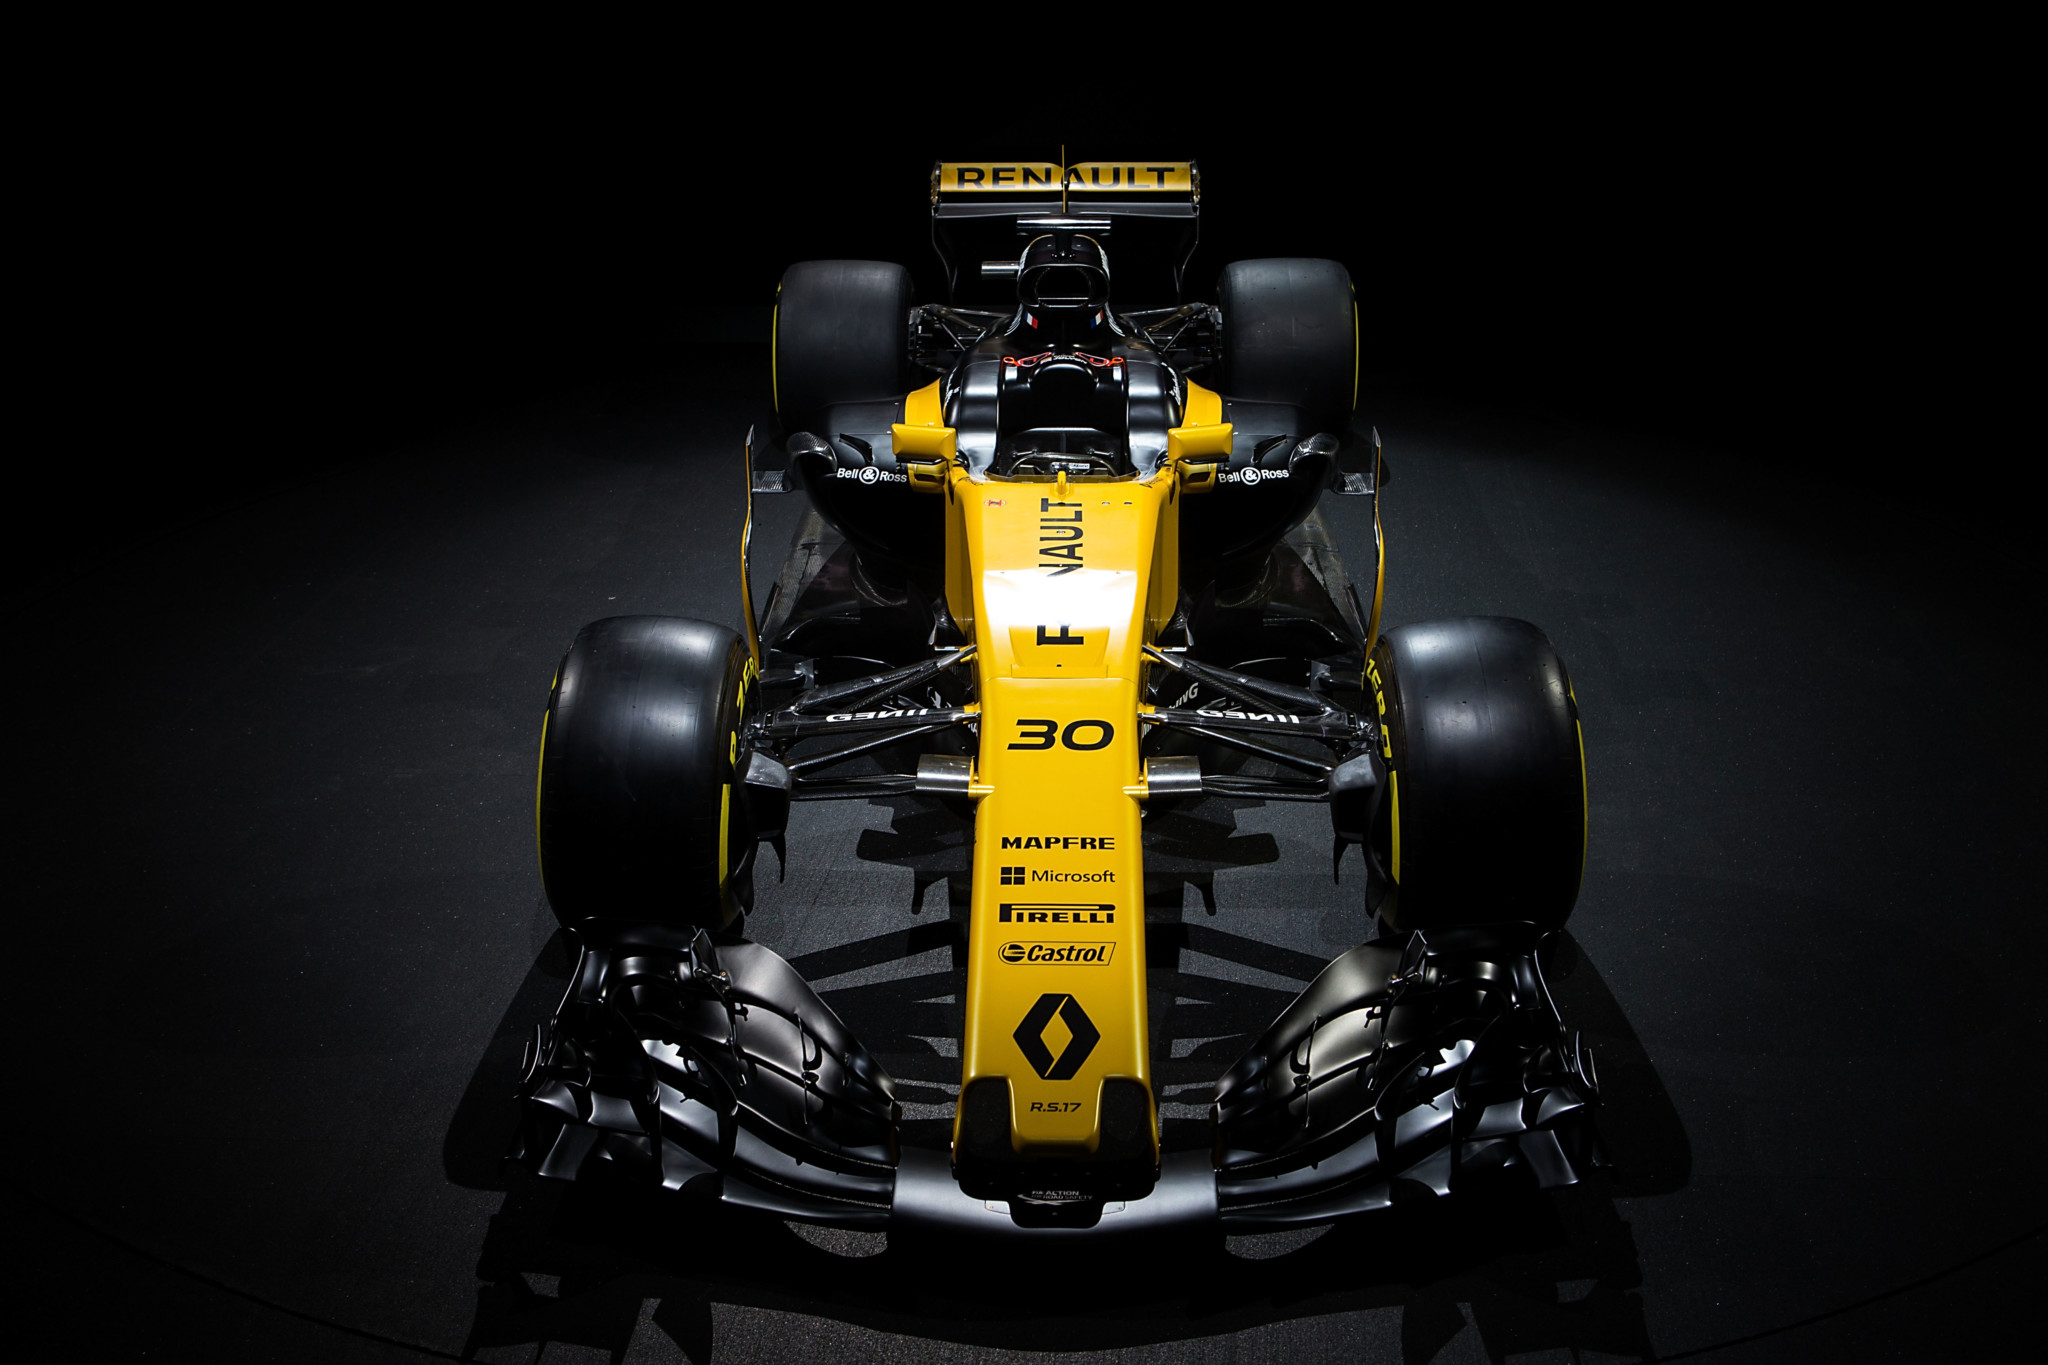 The renault sport f1 team rs17. Renault sport formula one team rs17 launch, royal horticultural society headquarters, london, england. Tuesday 21st february 2017.